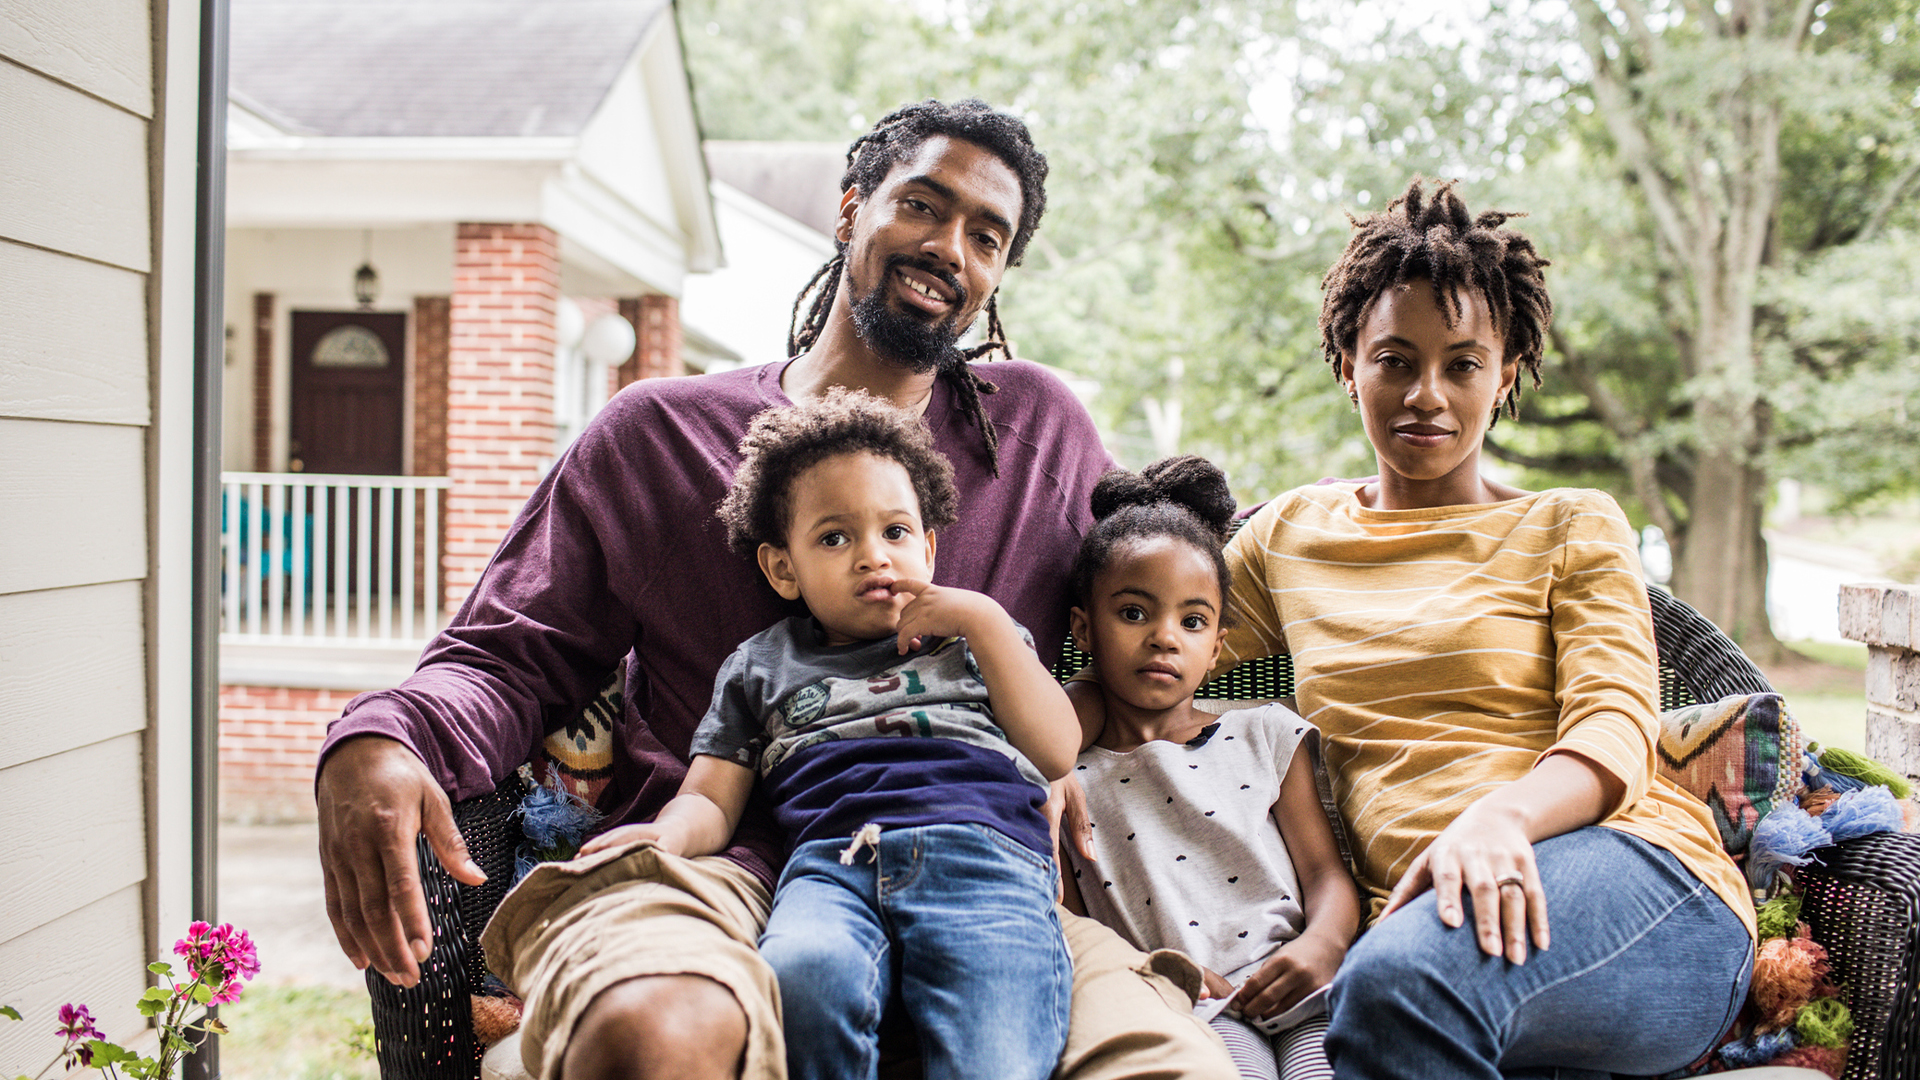 Black Seattle Family Asks White Neighbor To Present Their Home To Appraiser, Valuation Then Increases By $259K